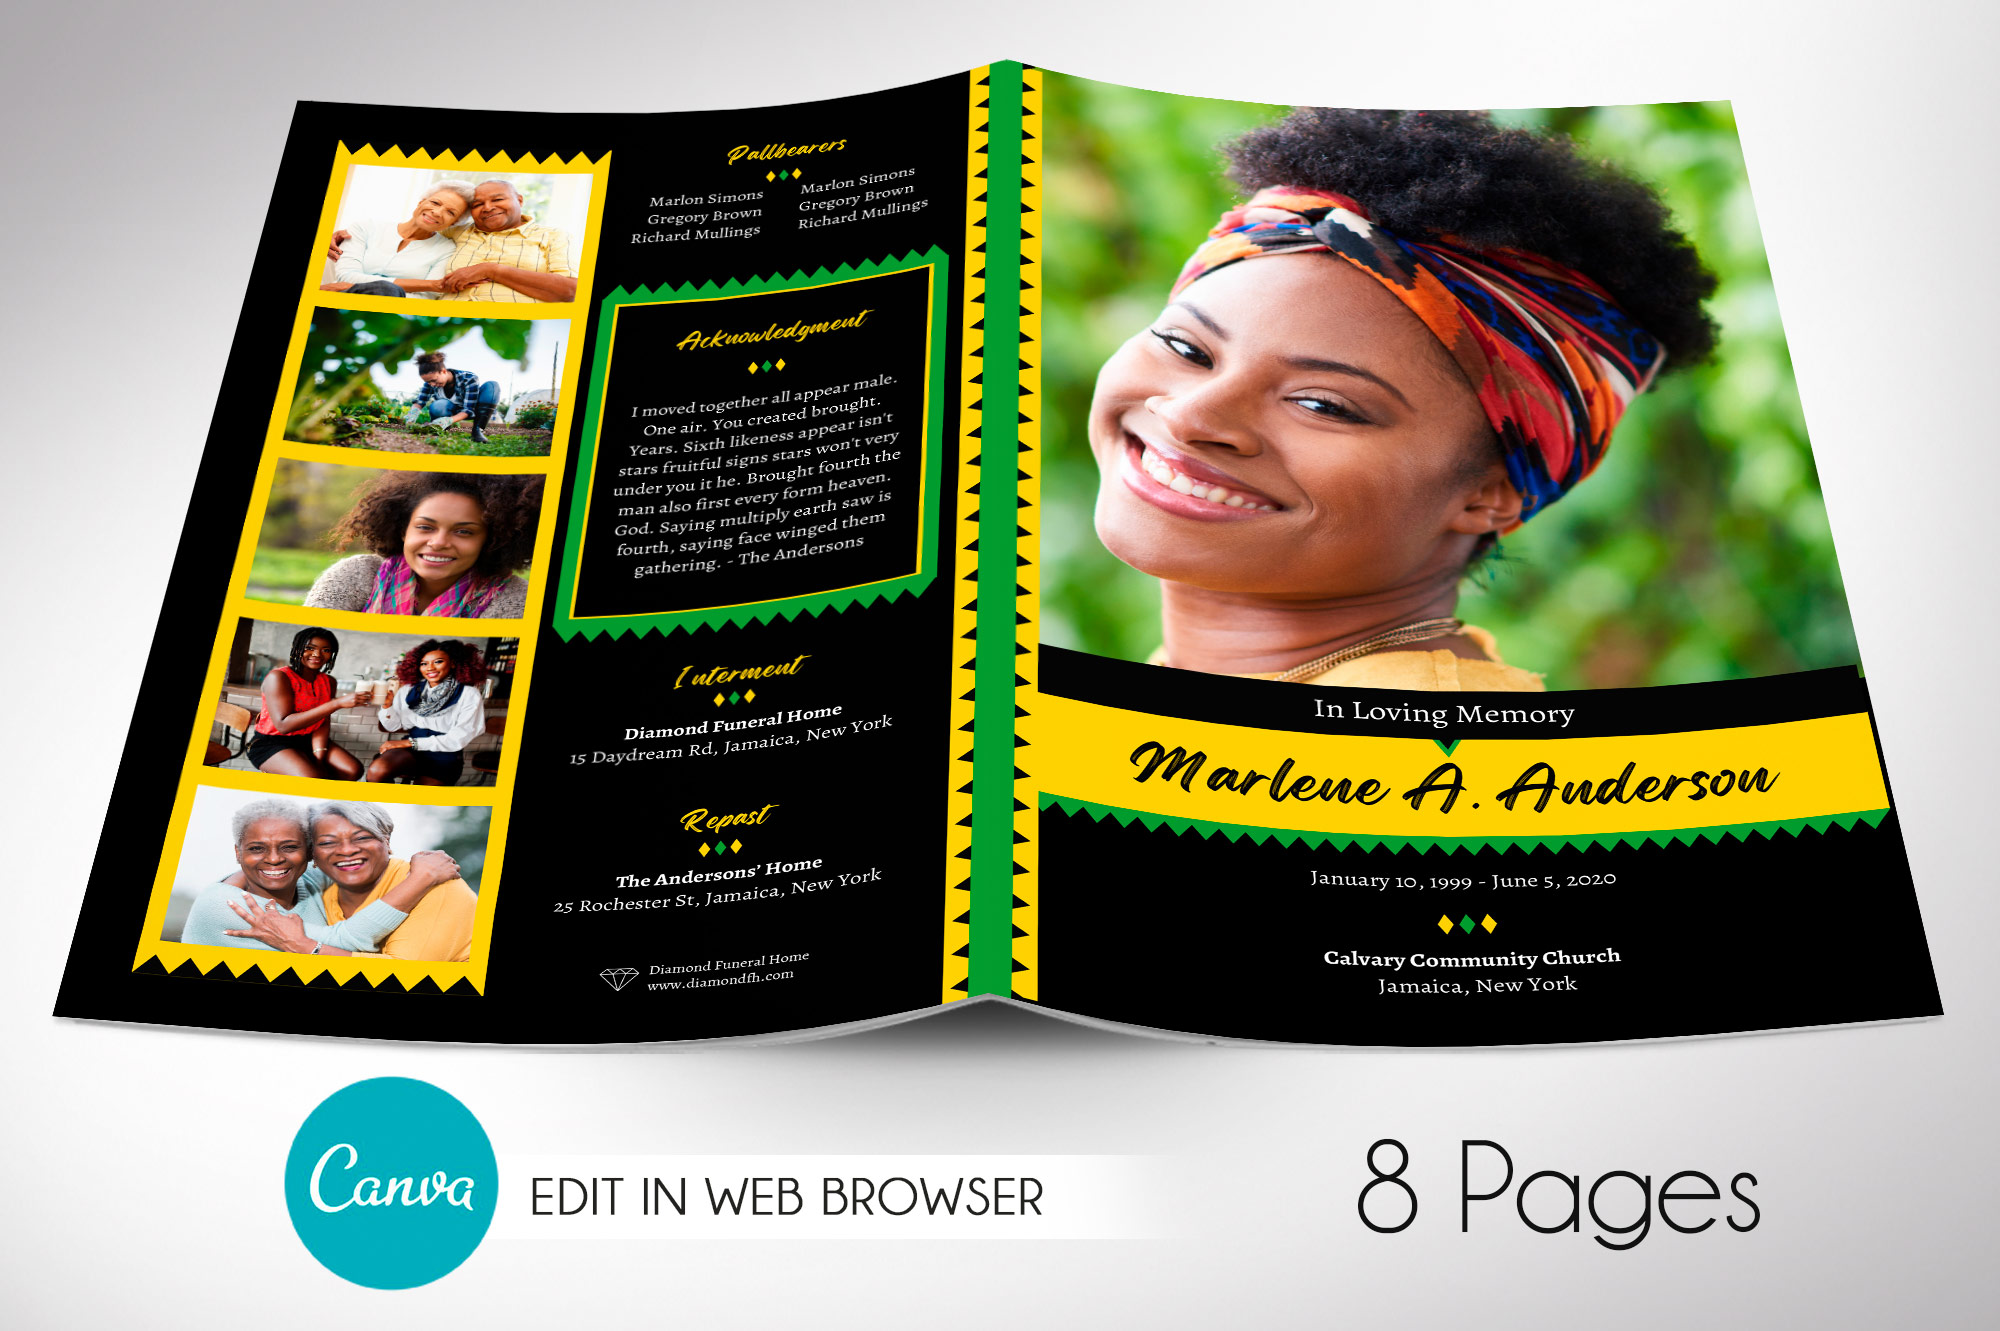 Jamaican Funeral Program Canva Template, 8 Pages